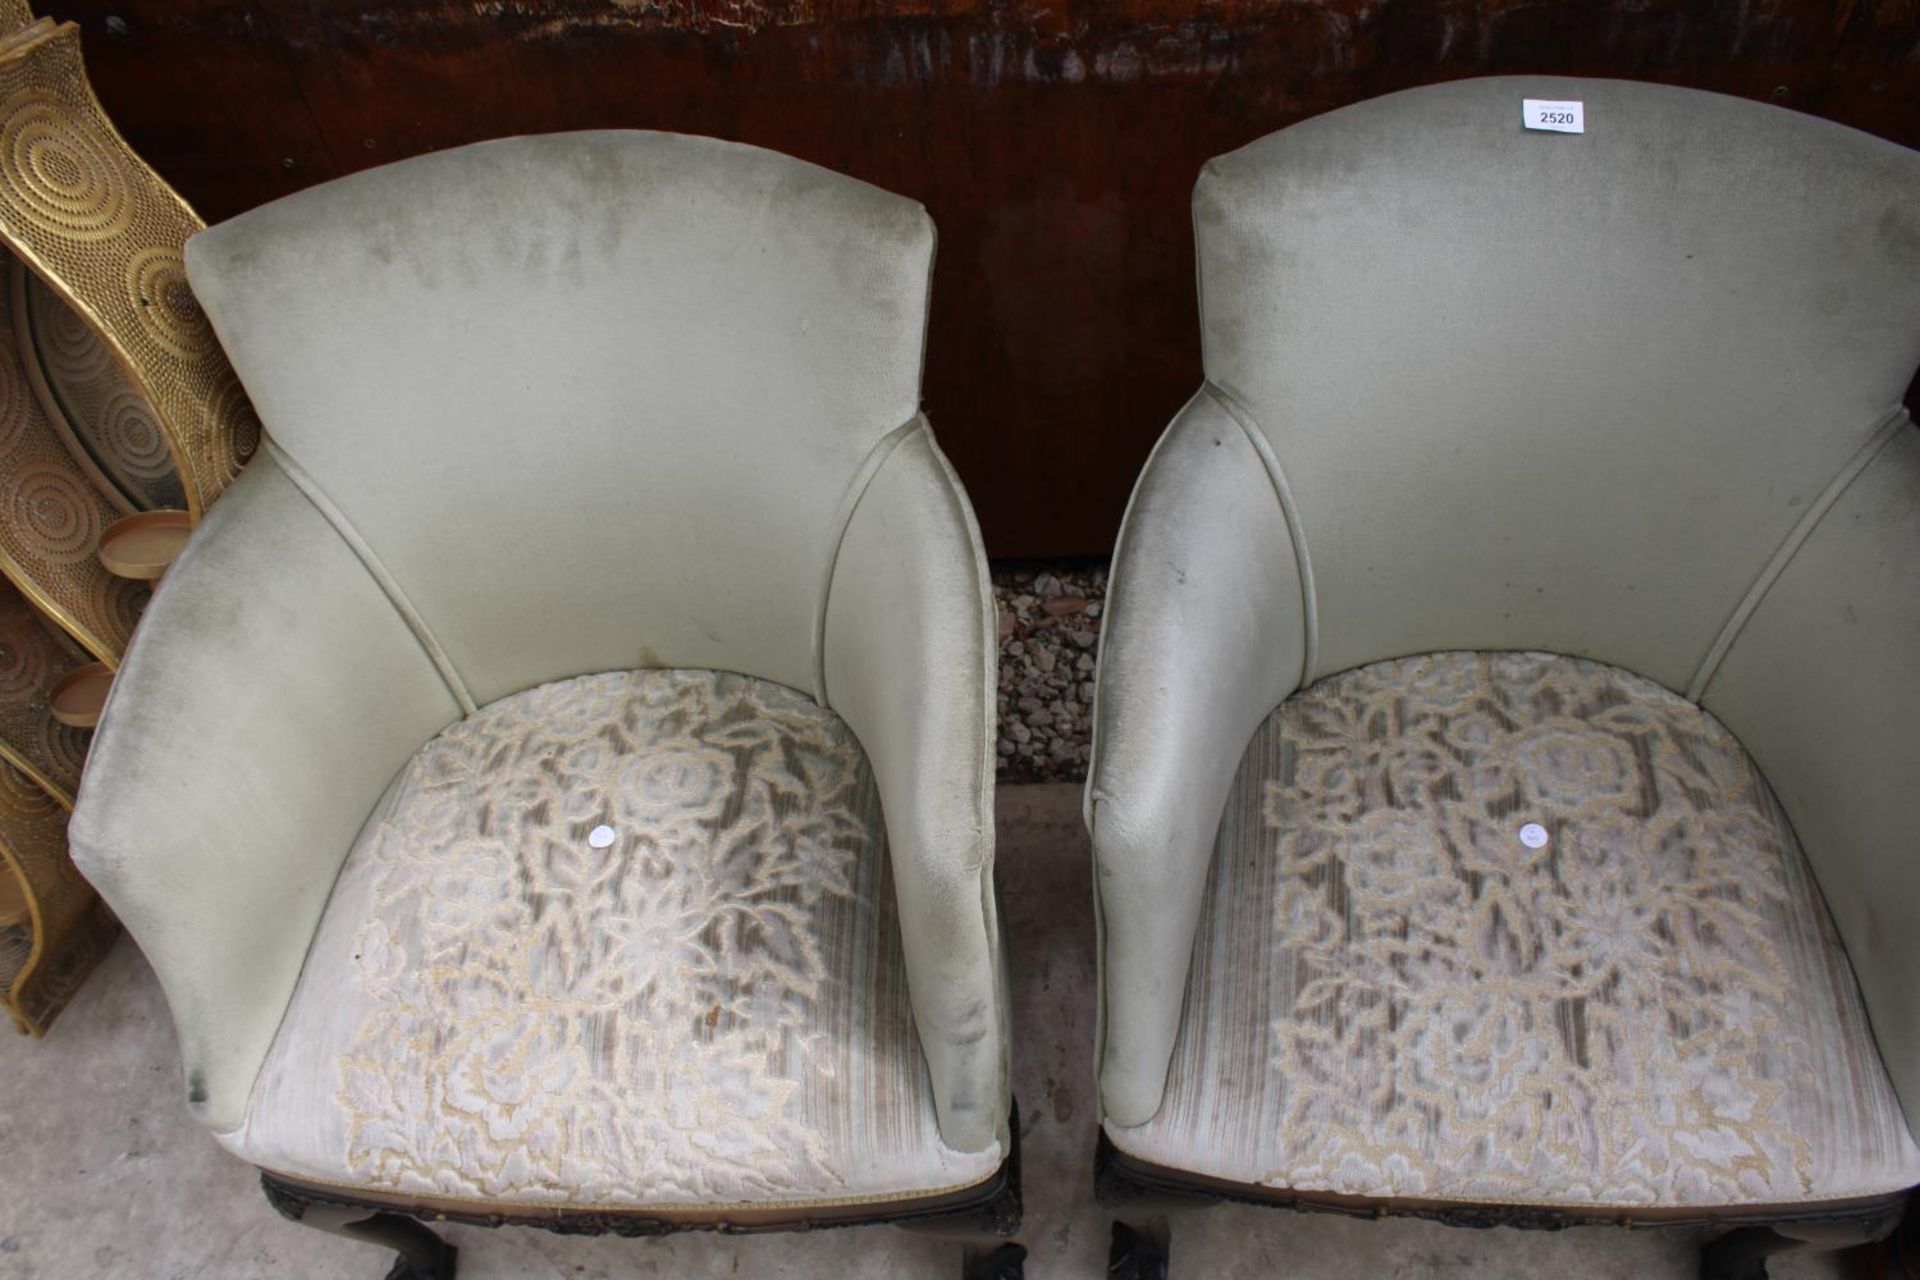 A PAIR OF MODERN UPHOSTERED TUB CHAIRS ON FRONT CABRIOLE LEGS WITH BALL AND CLAW FEET - Image 3 of 5